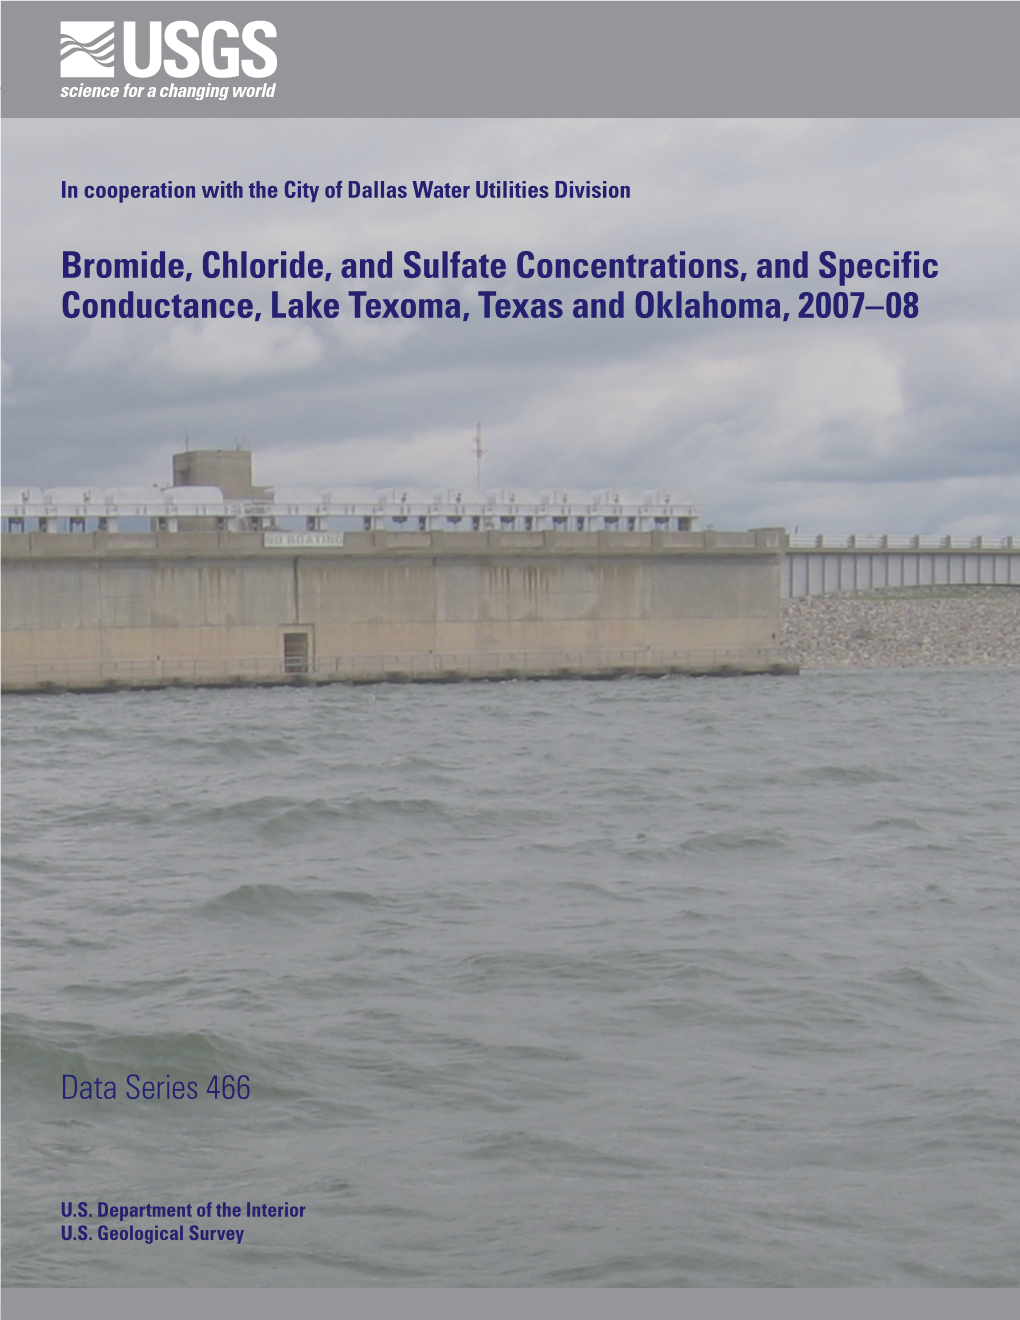 Bromide, Chloride, and Sulfate Concentrations, and Specific Conductance, Lake Texoma, Texas and Oklahoma, 2007–08